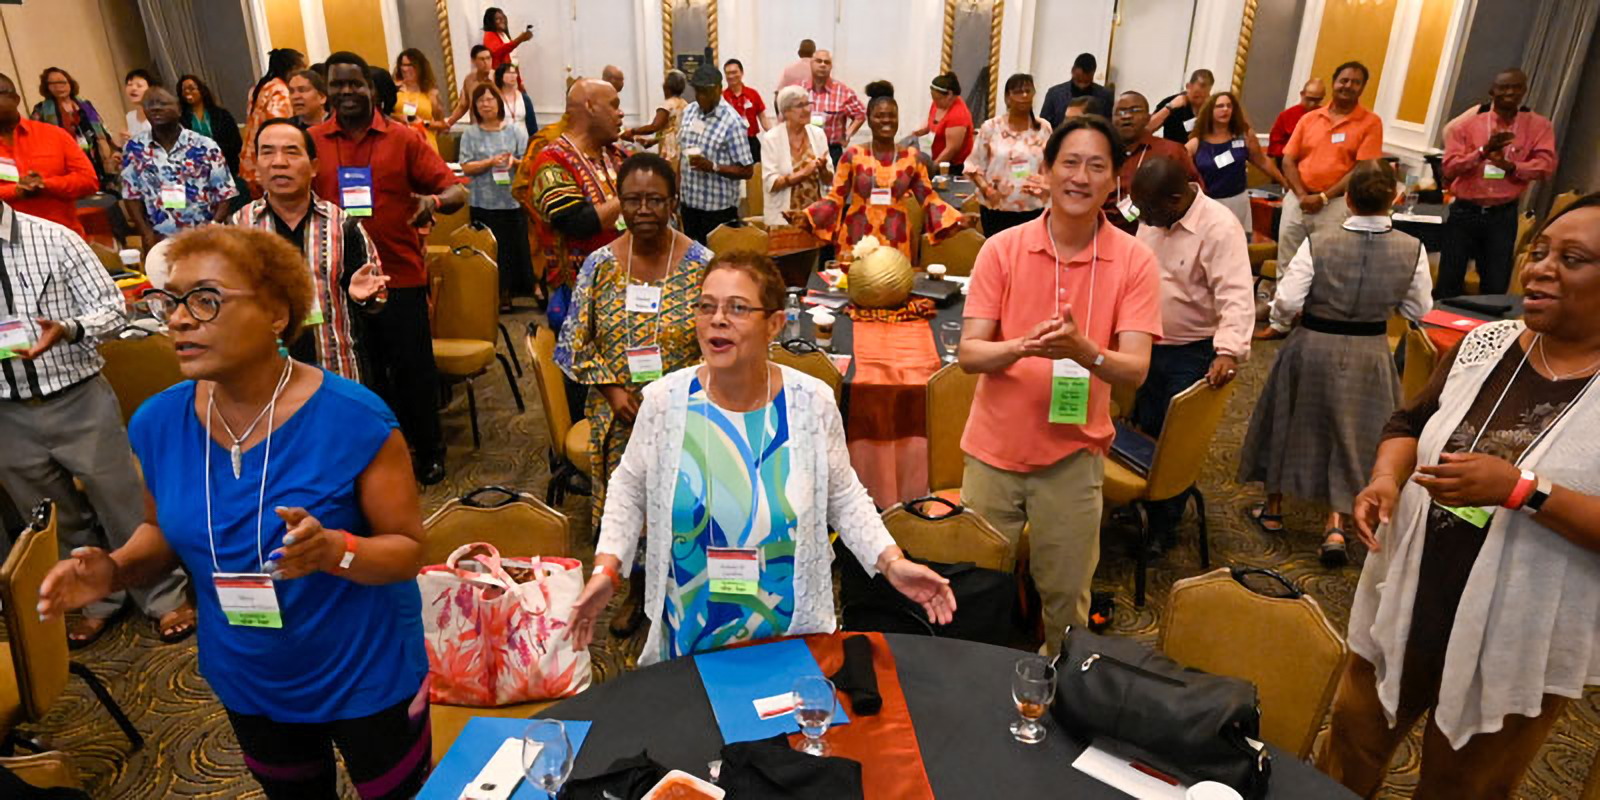 About 200 Presbyterians attended the Convocation for Communities of Color just before Big Tent officially opened Thursday. (Photo by Rich Copley)